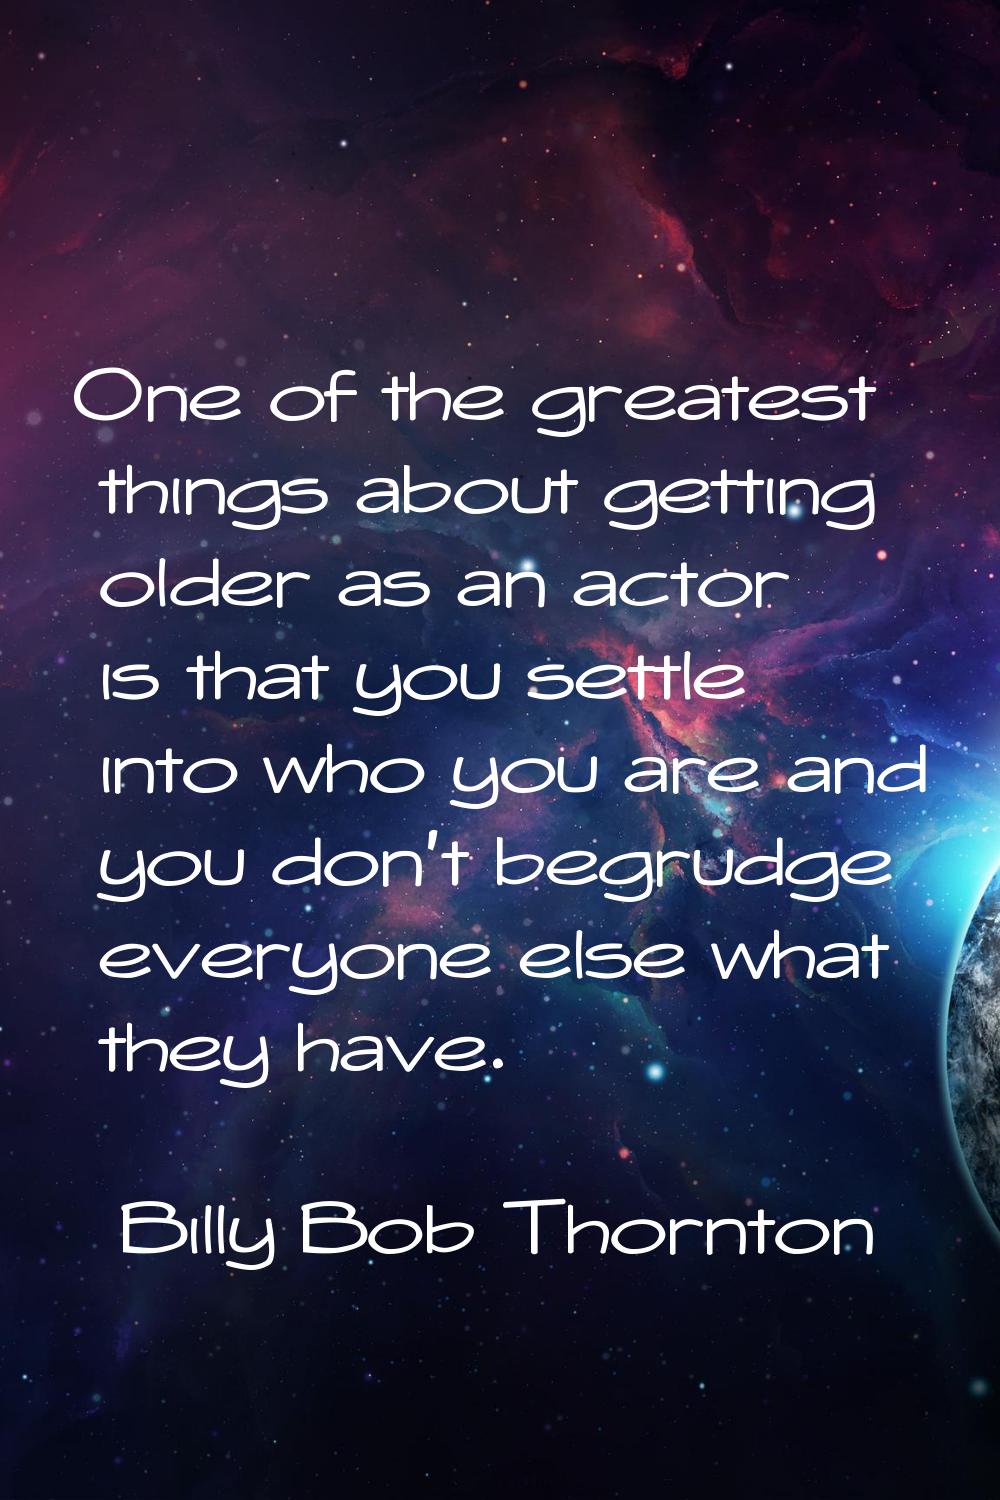 One of the greatest things about getting older as an actor is that you settle into who you are and 